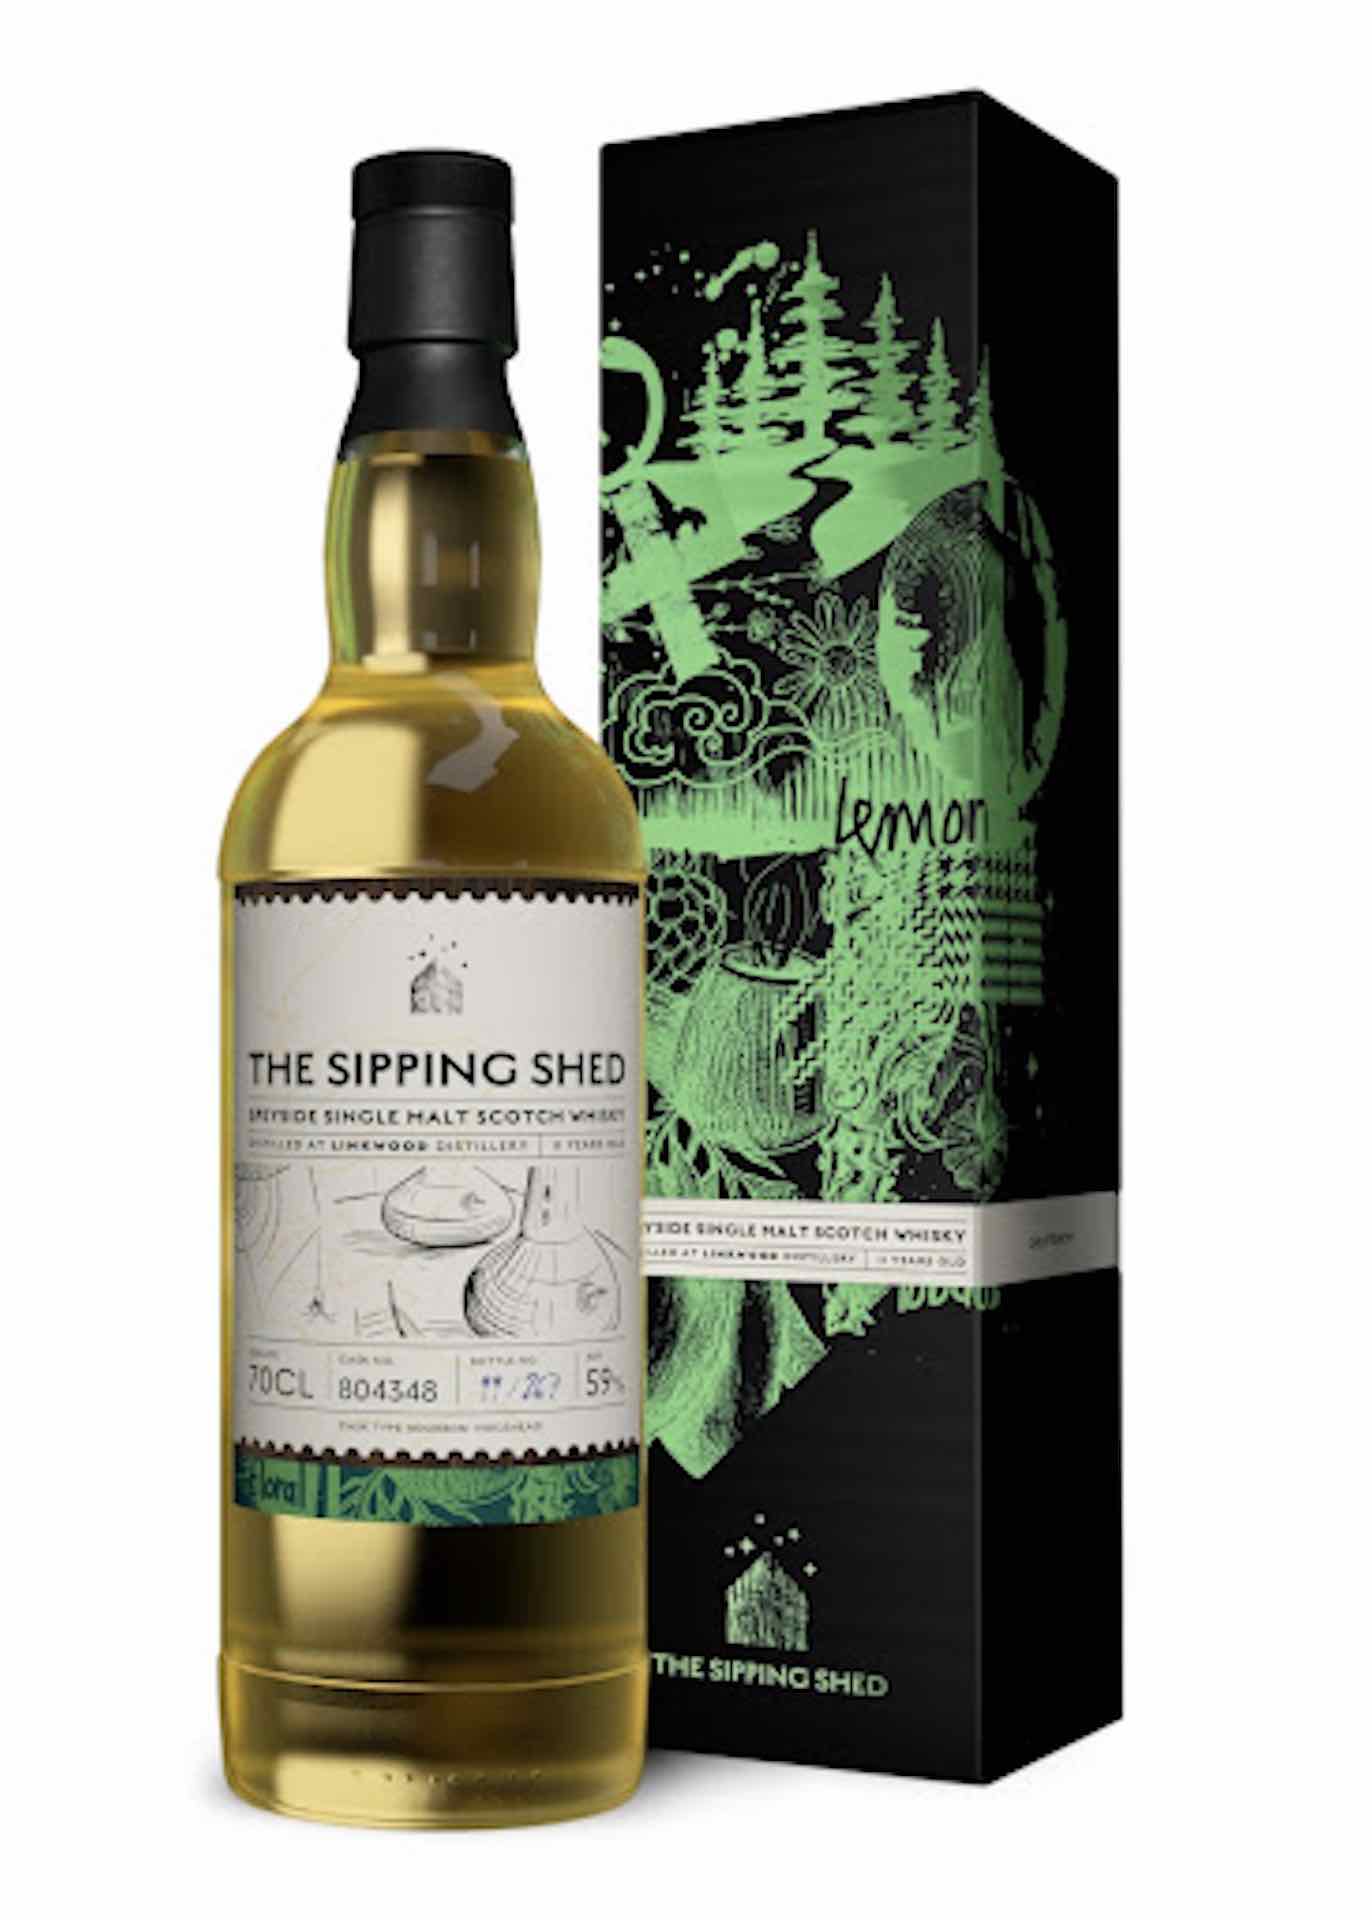 The Sipping Shed Linkwood 11 Year Old Single Cask Whisky